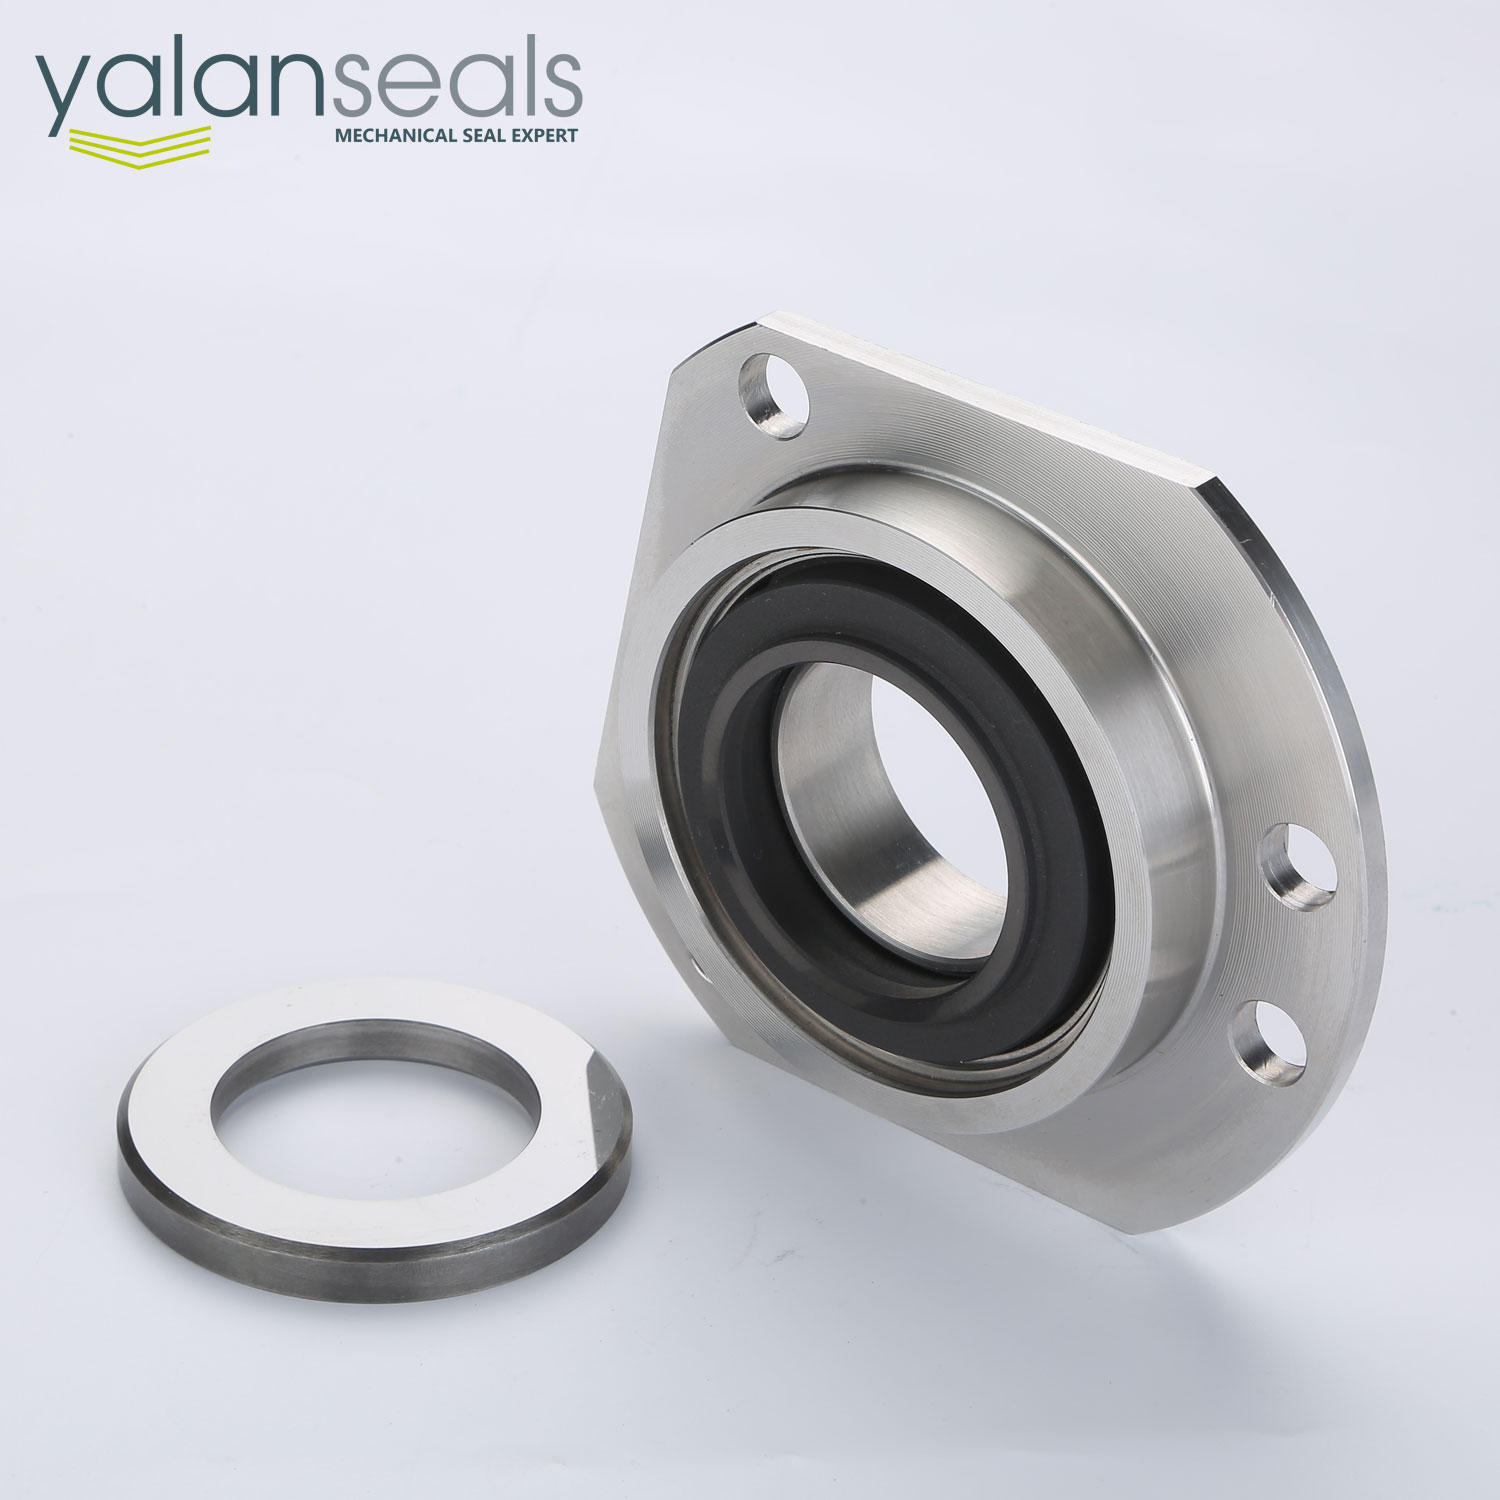 YALAN 60B-51B(05A) Double Seal for High Speed Pumps